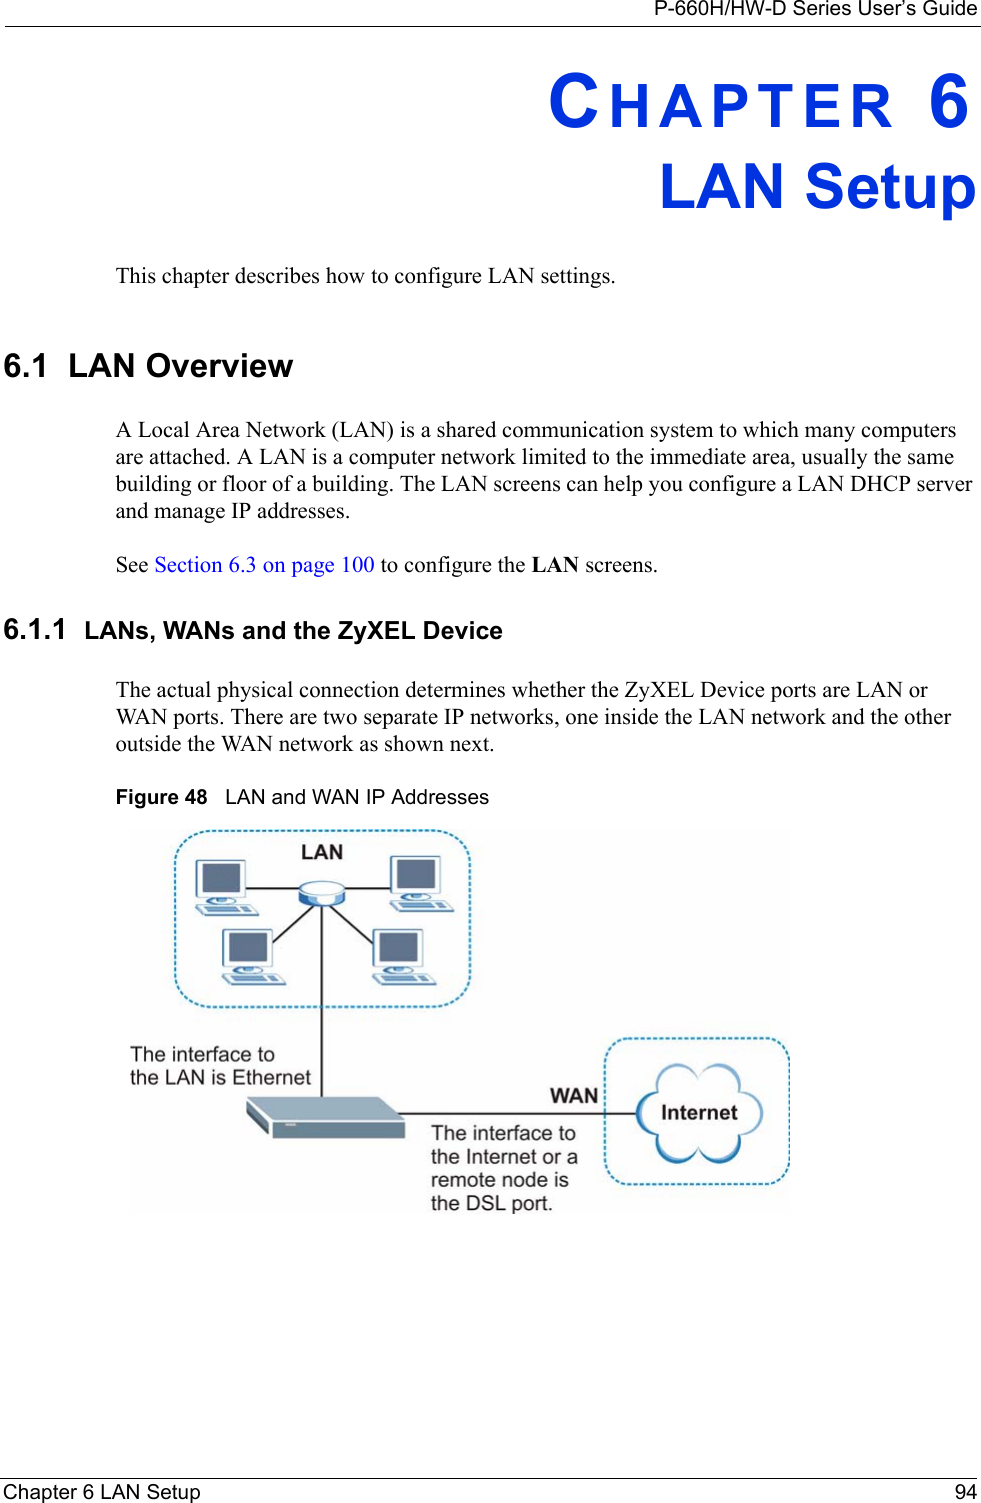 P-660H/HW-D Series User’s GuideChapter 6 LAN Setup 94CHAPTER 6LAN SetupThis chapter describes how to configure LAN settings.6.1  LAN Overview A Local Area Network (LAN) is a shared communication system to which many computers are attached. A LAN is a computer network limited to the immediate area, usually the same building or floor of a building. The LAN screens can help you configure a LAN DHCP server and manage IP addresses.  See Section 6.3 on page 100 to configure the LAN screens. 6.1.1  LANs, WANs and the ZyXEL DeviceThe actual physical connection determines whether the ZyXEL Device ports are LAN or WAN ports. There are two separate IP networks, one inside the LAN network and the other outside the WAN network as shown next.Figure 48   LAN and WAN IP Addresses